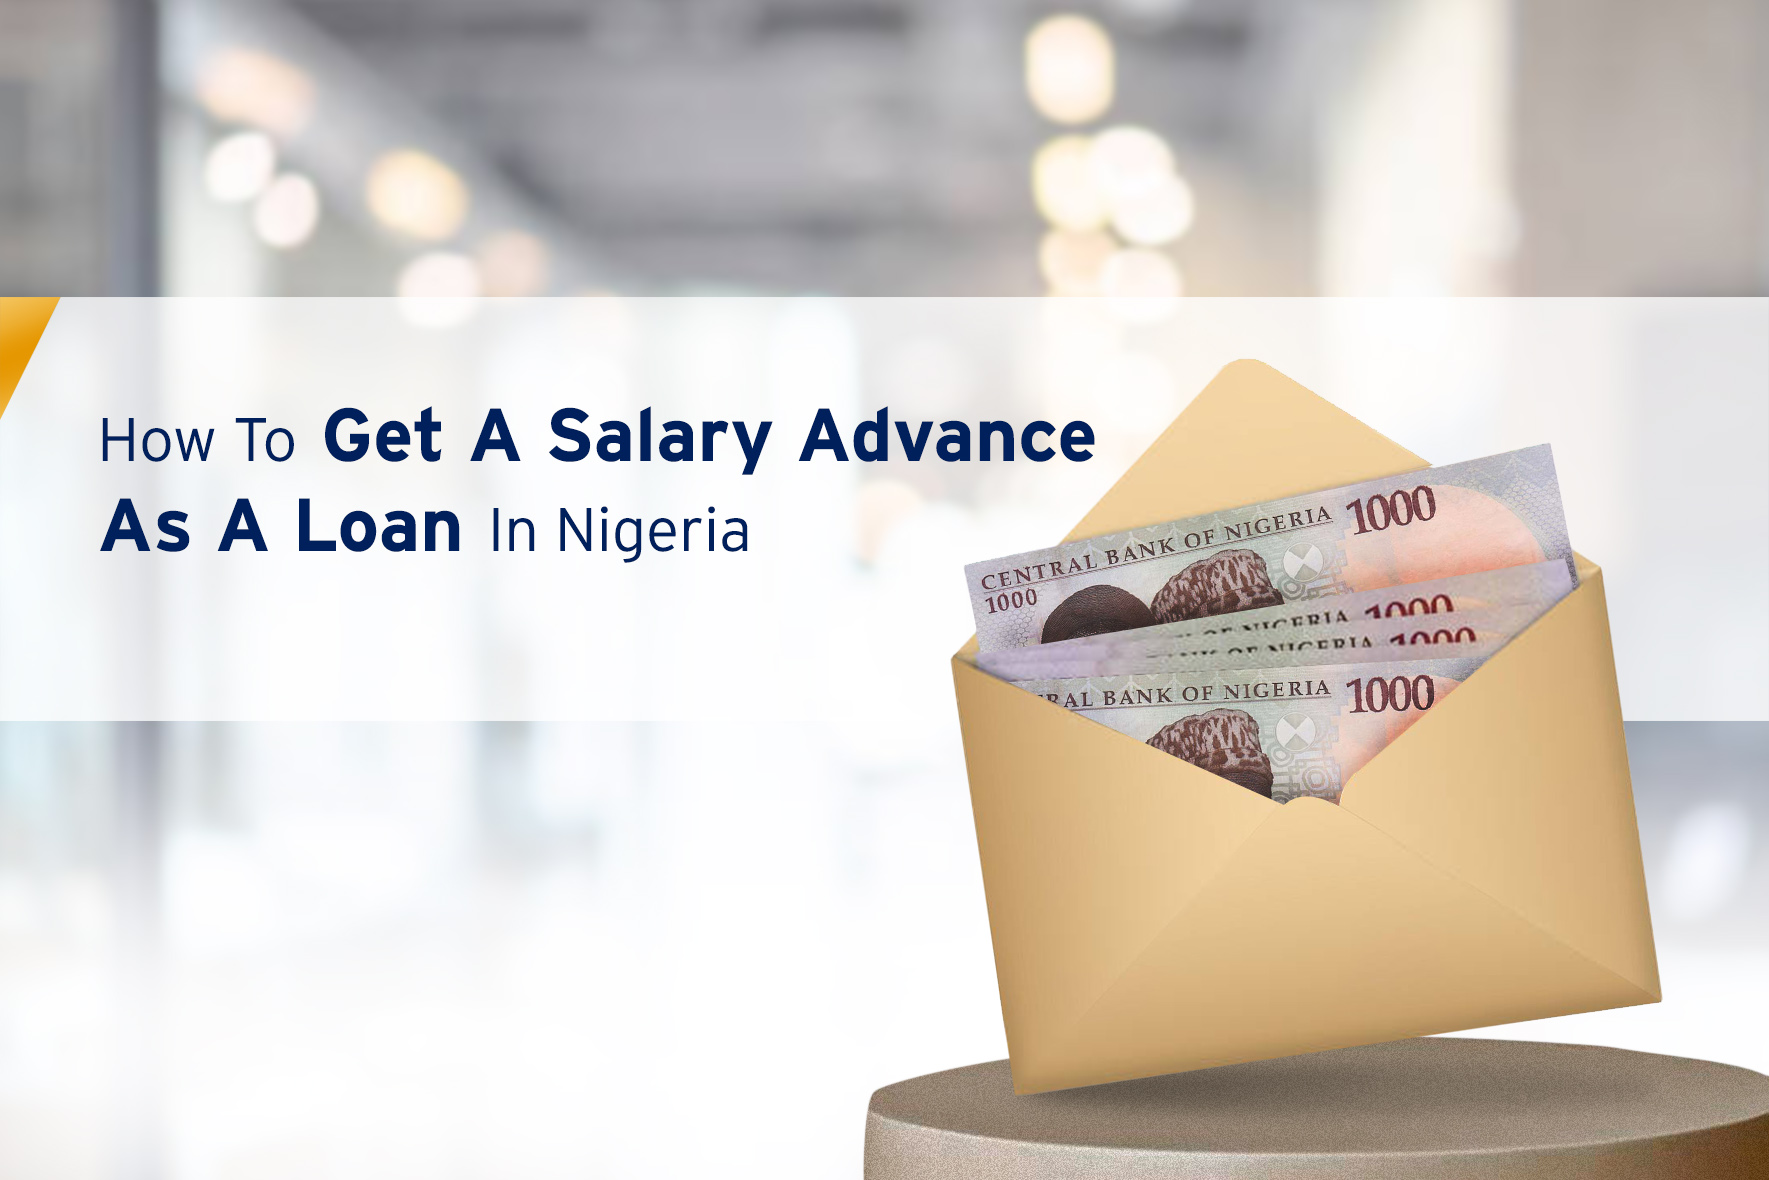 How-To-Get-A-Salary-Advance-As-A-Loan-In-Nigeria